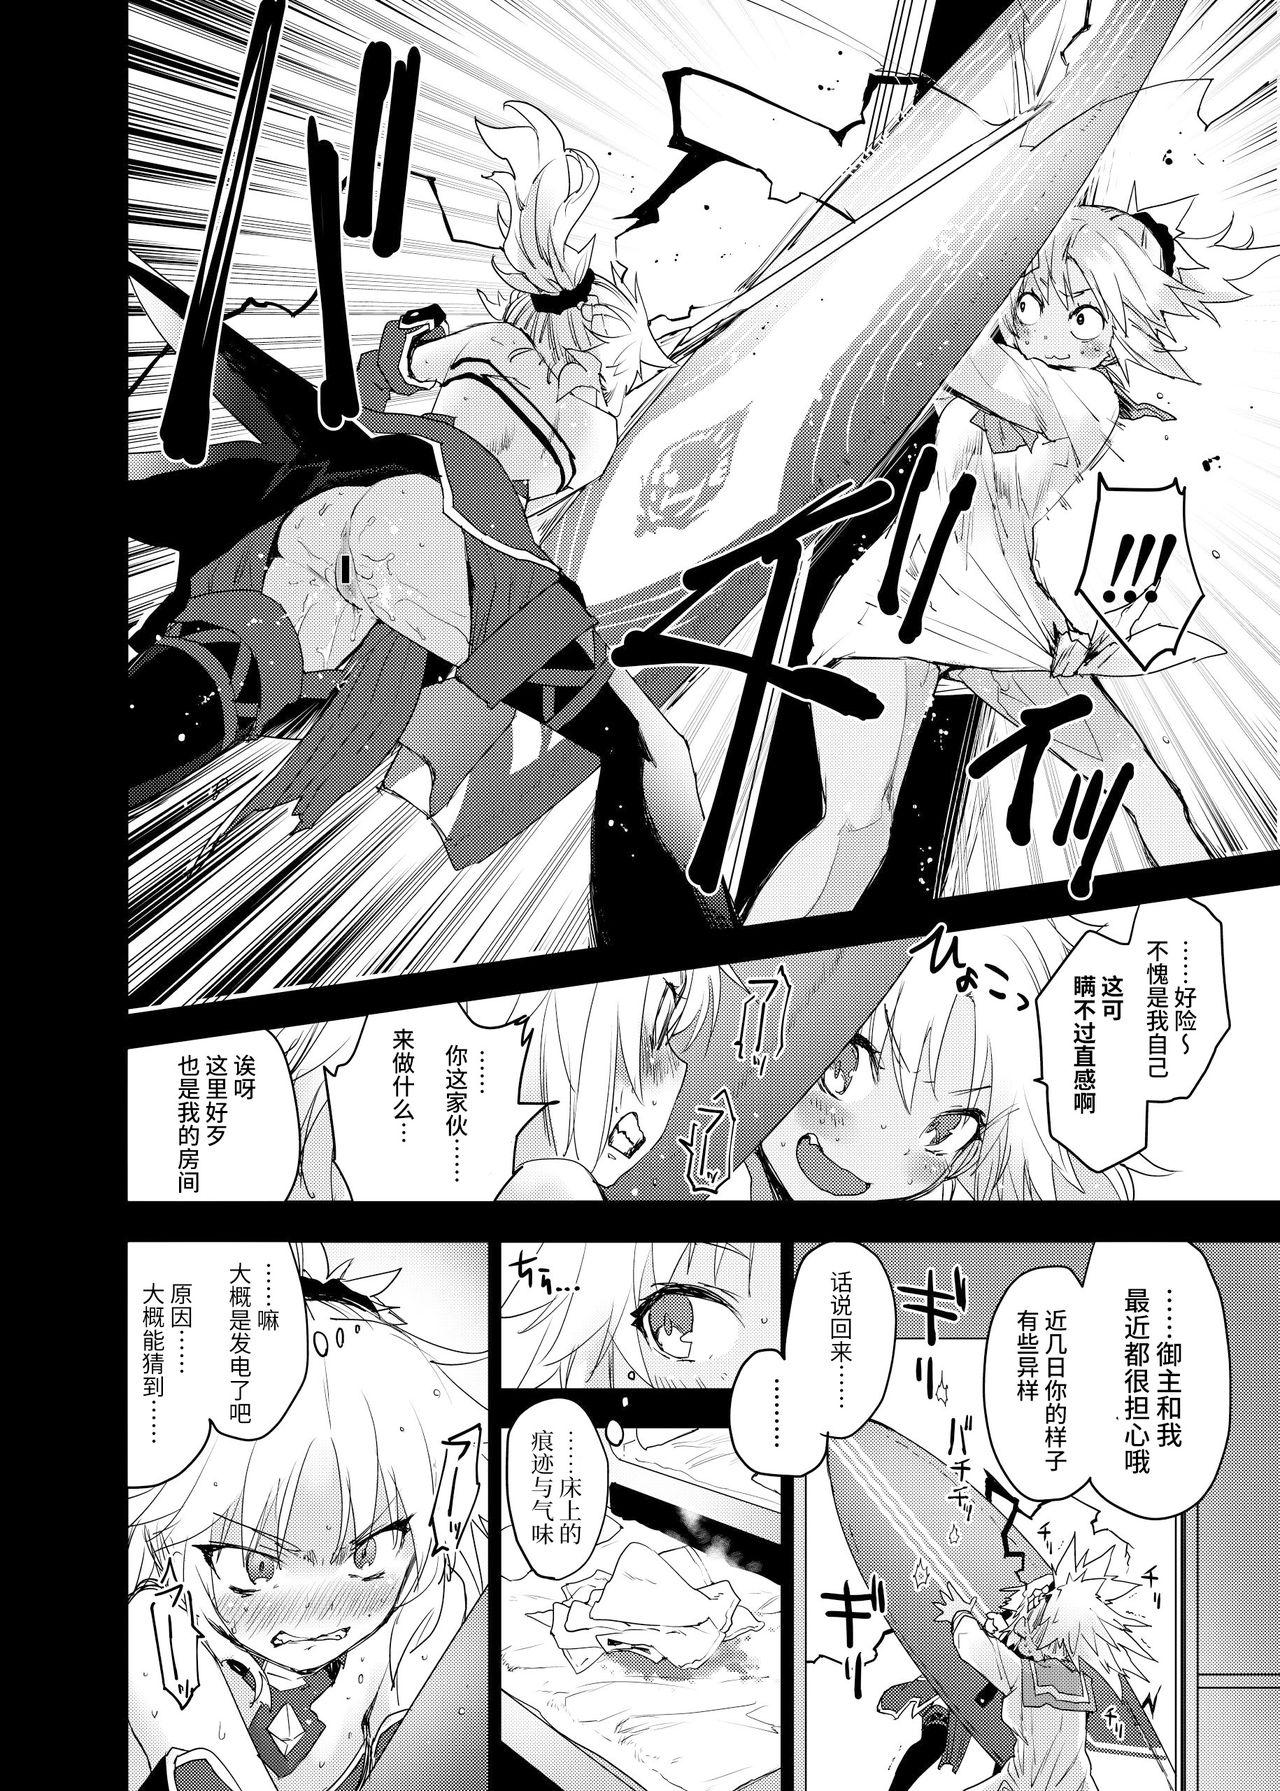 Hardcore With My Honey Knight - Fate grand order Free Amature Porn - Page 11